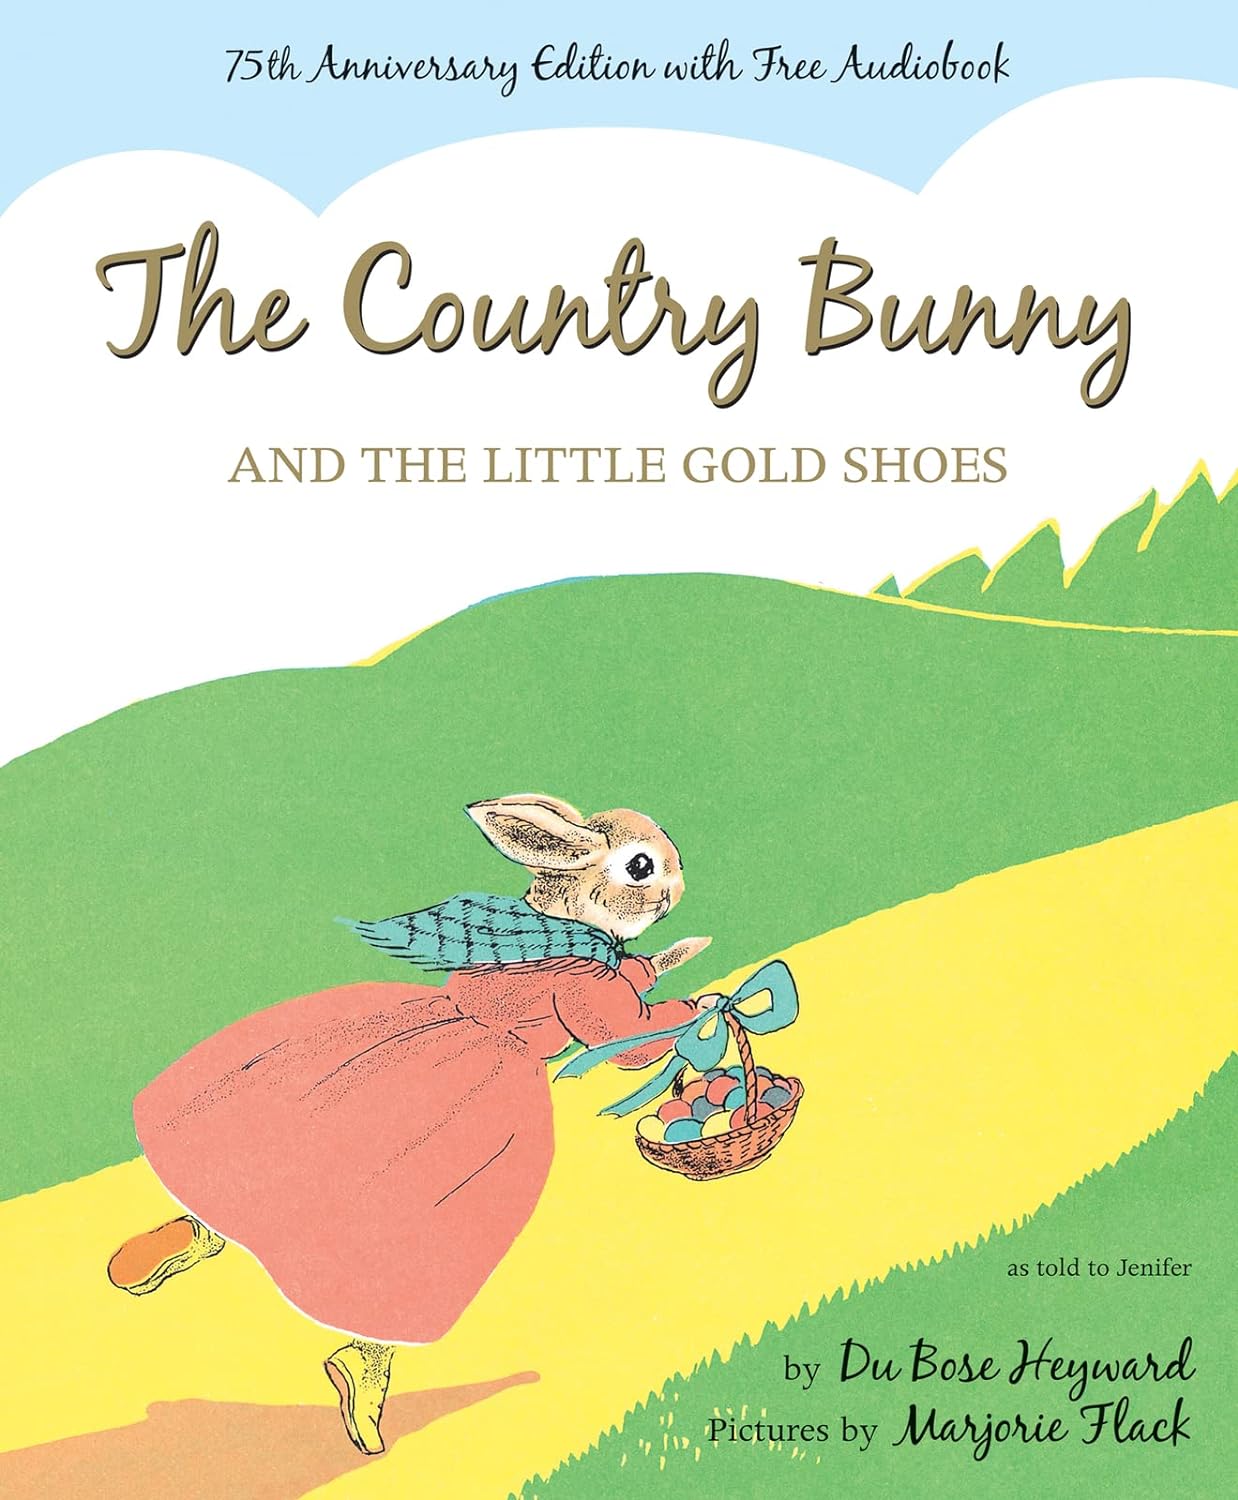 books about bunnies7